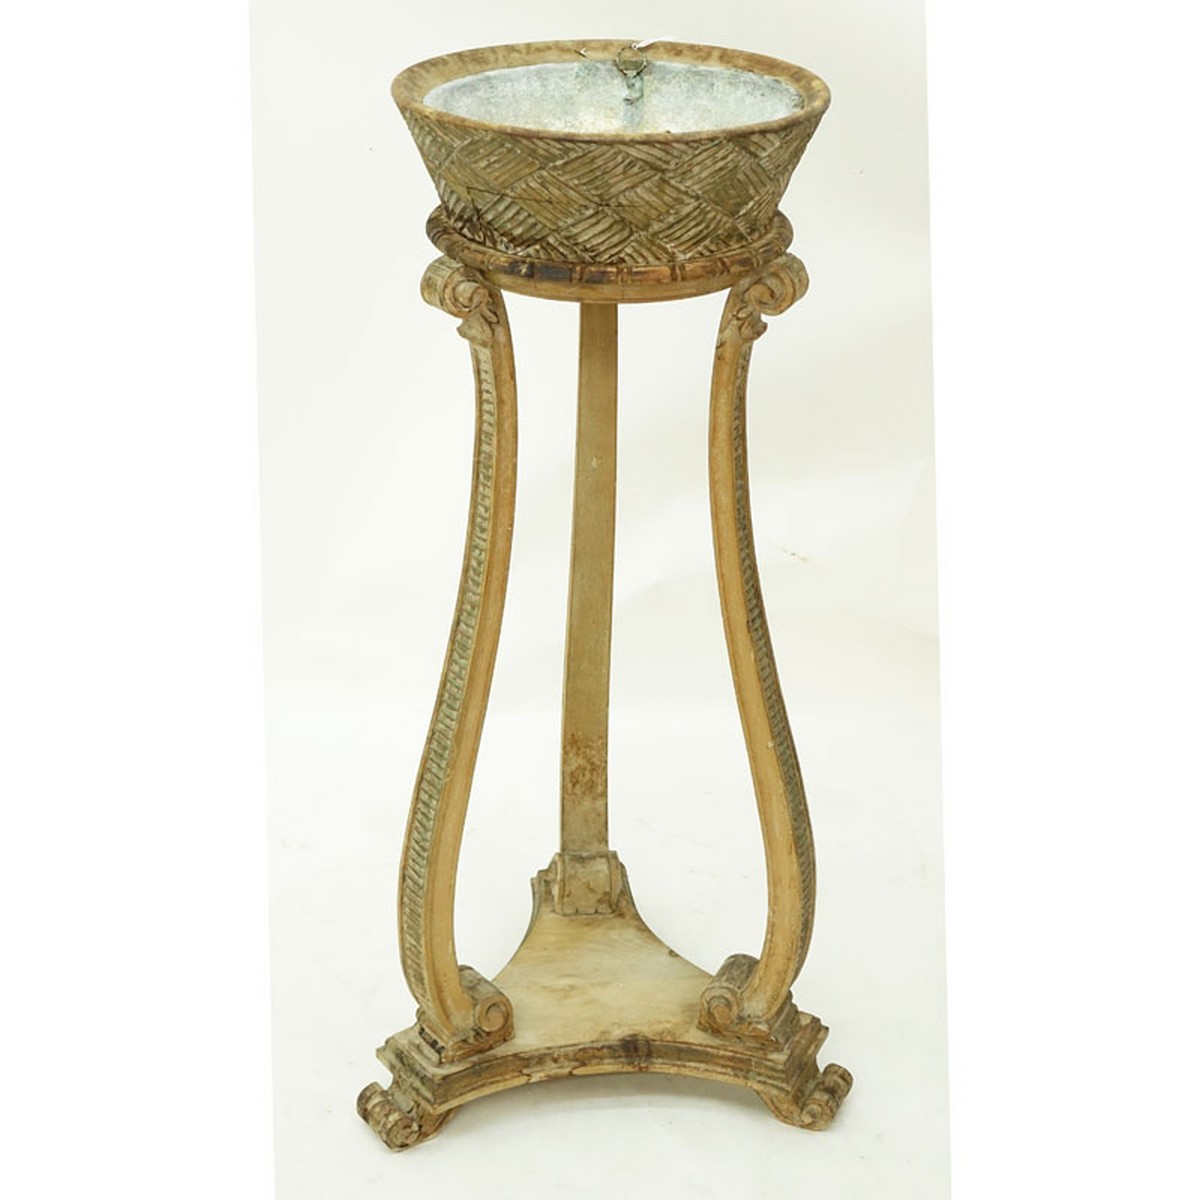 Neoclassical Style Painted and Carved Wood Planter. Includes insert to top.